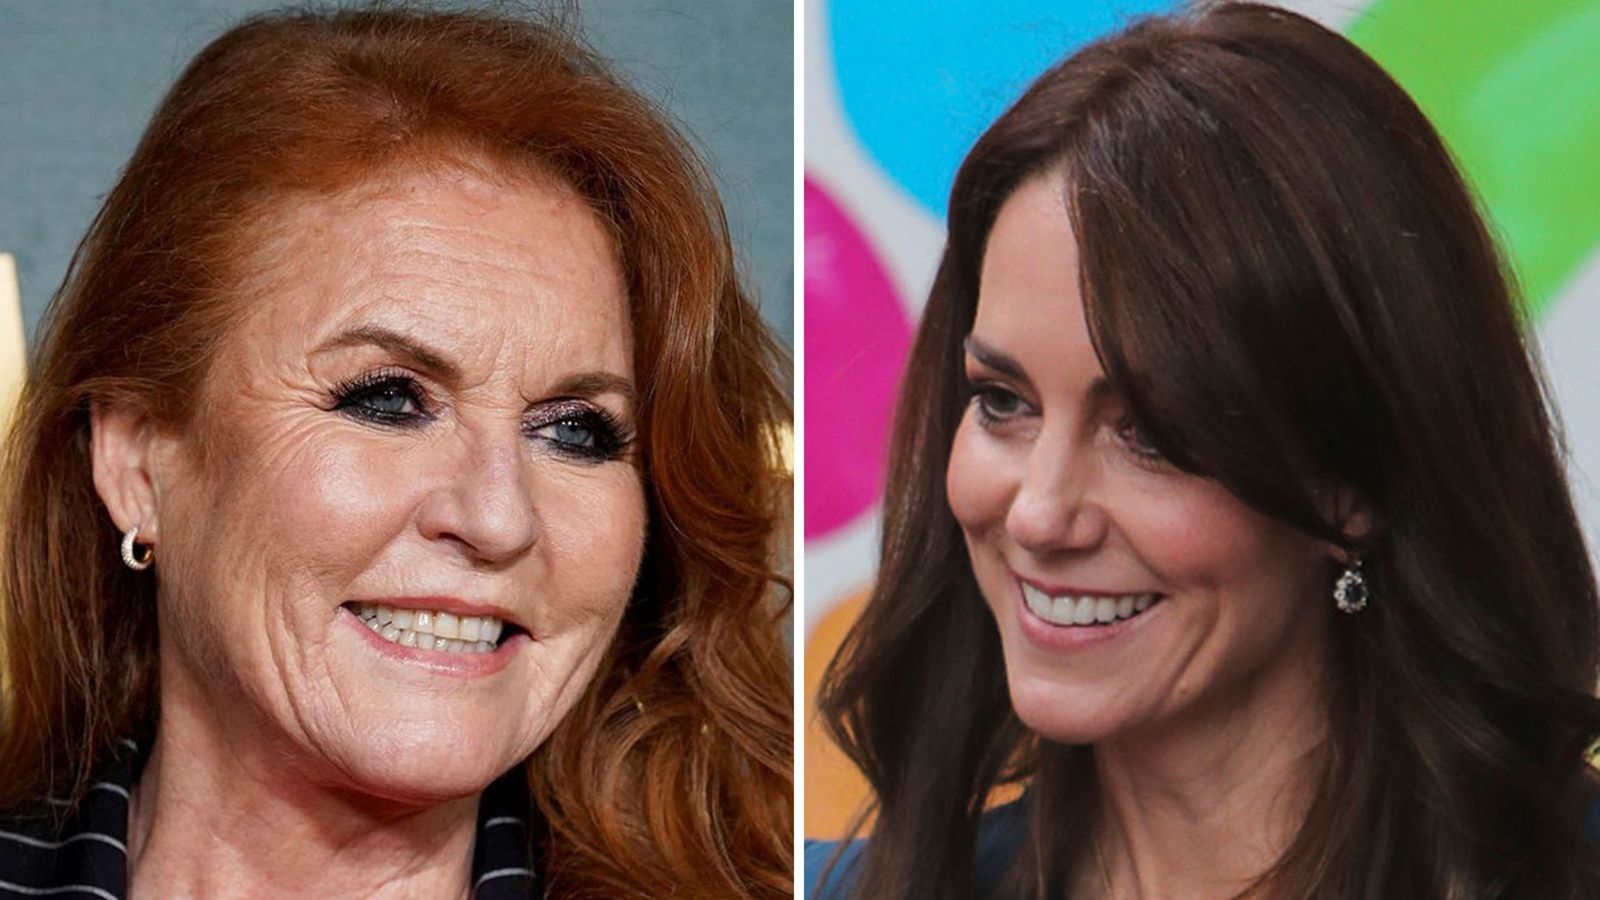 Duchess of York 'full of admiration' for Kate after cancer announcement